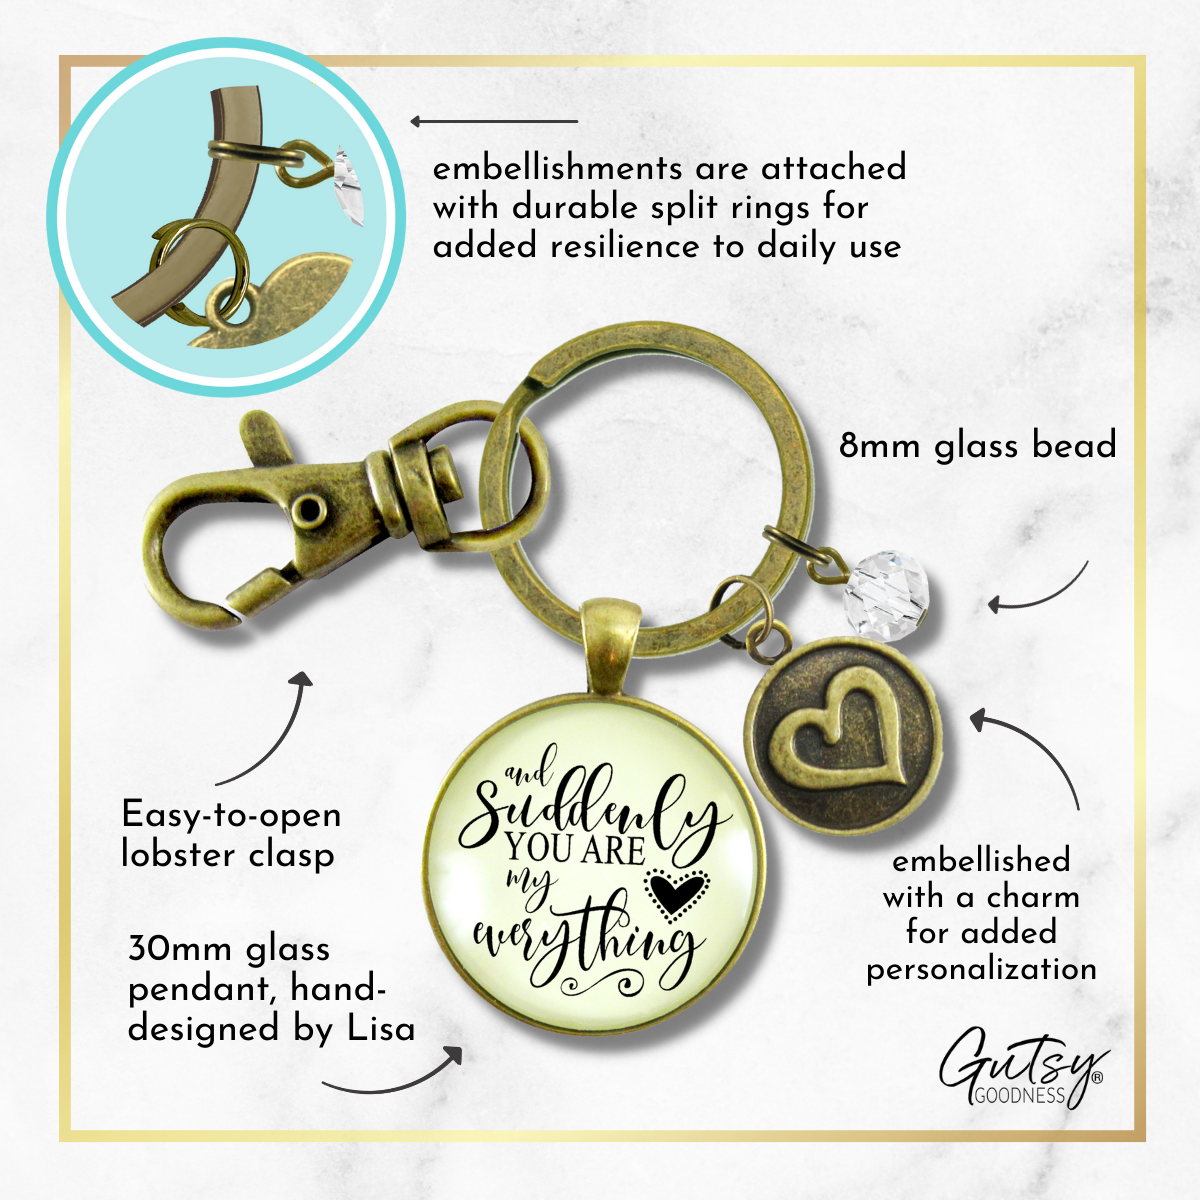 First Mother's Day Keychain And Suddenly You Are My Everything Rustic Mom Jewelry Heart - Gutsy Goodness Handmade Jewelry;First Mother's Day Keychain And Suddenly You Are My Everything Rustic Mom Jewelry Heart - Gutsy Goodness Handmade Jewelry Gifts